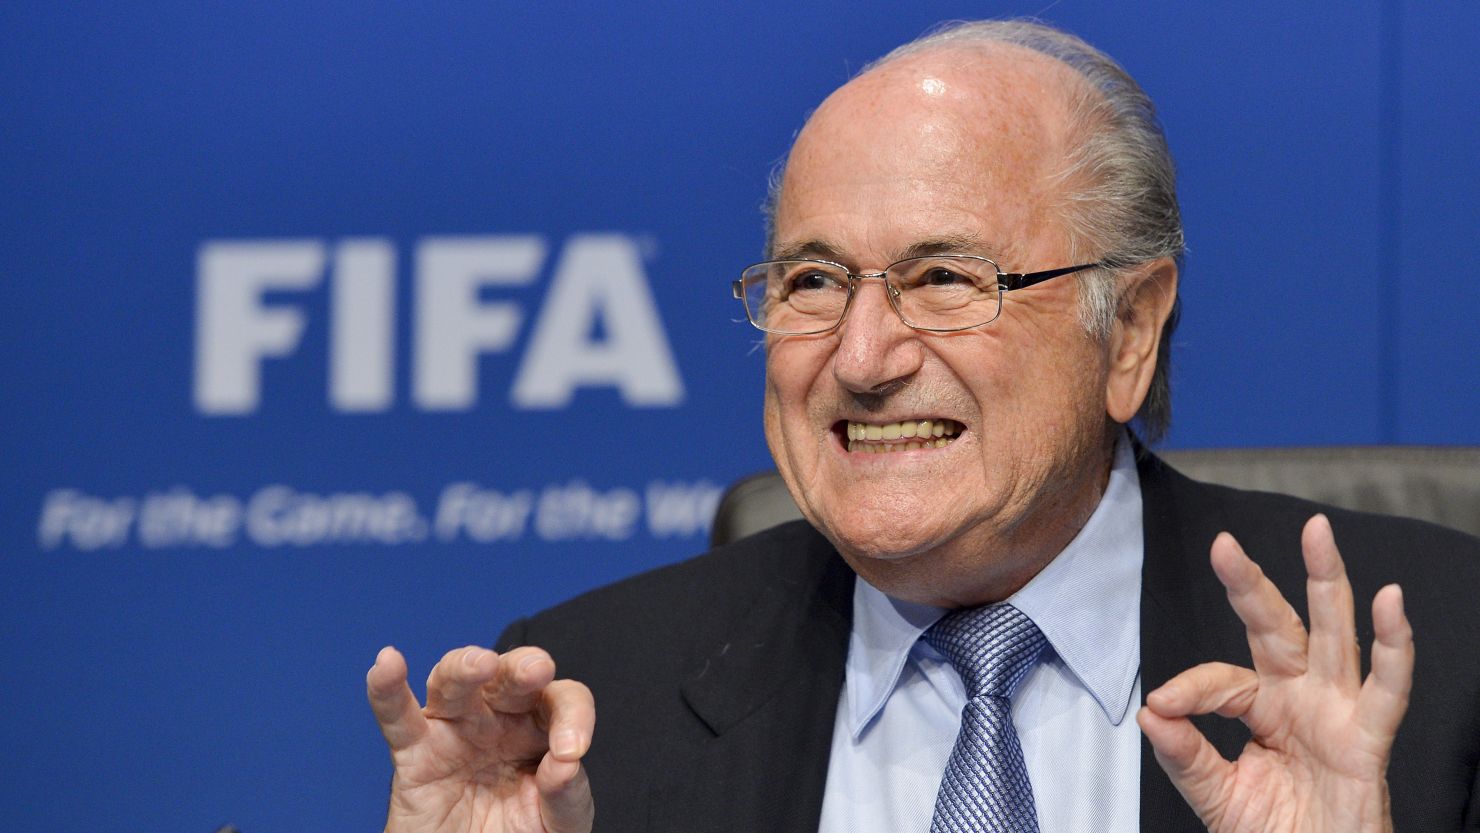 Sepp Blatter vowed to steer FIFA away from "troubled waters" when he was re-elected as president in June 2011